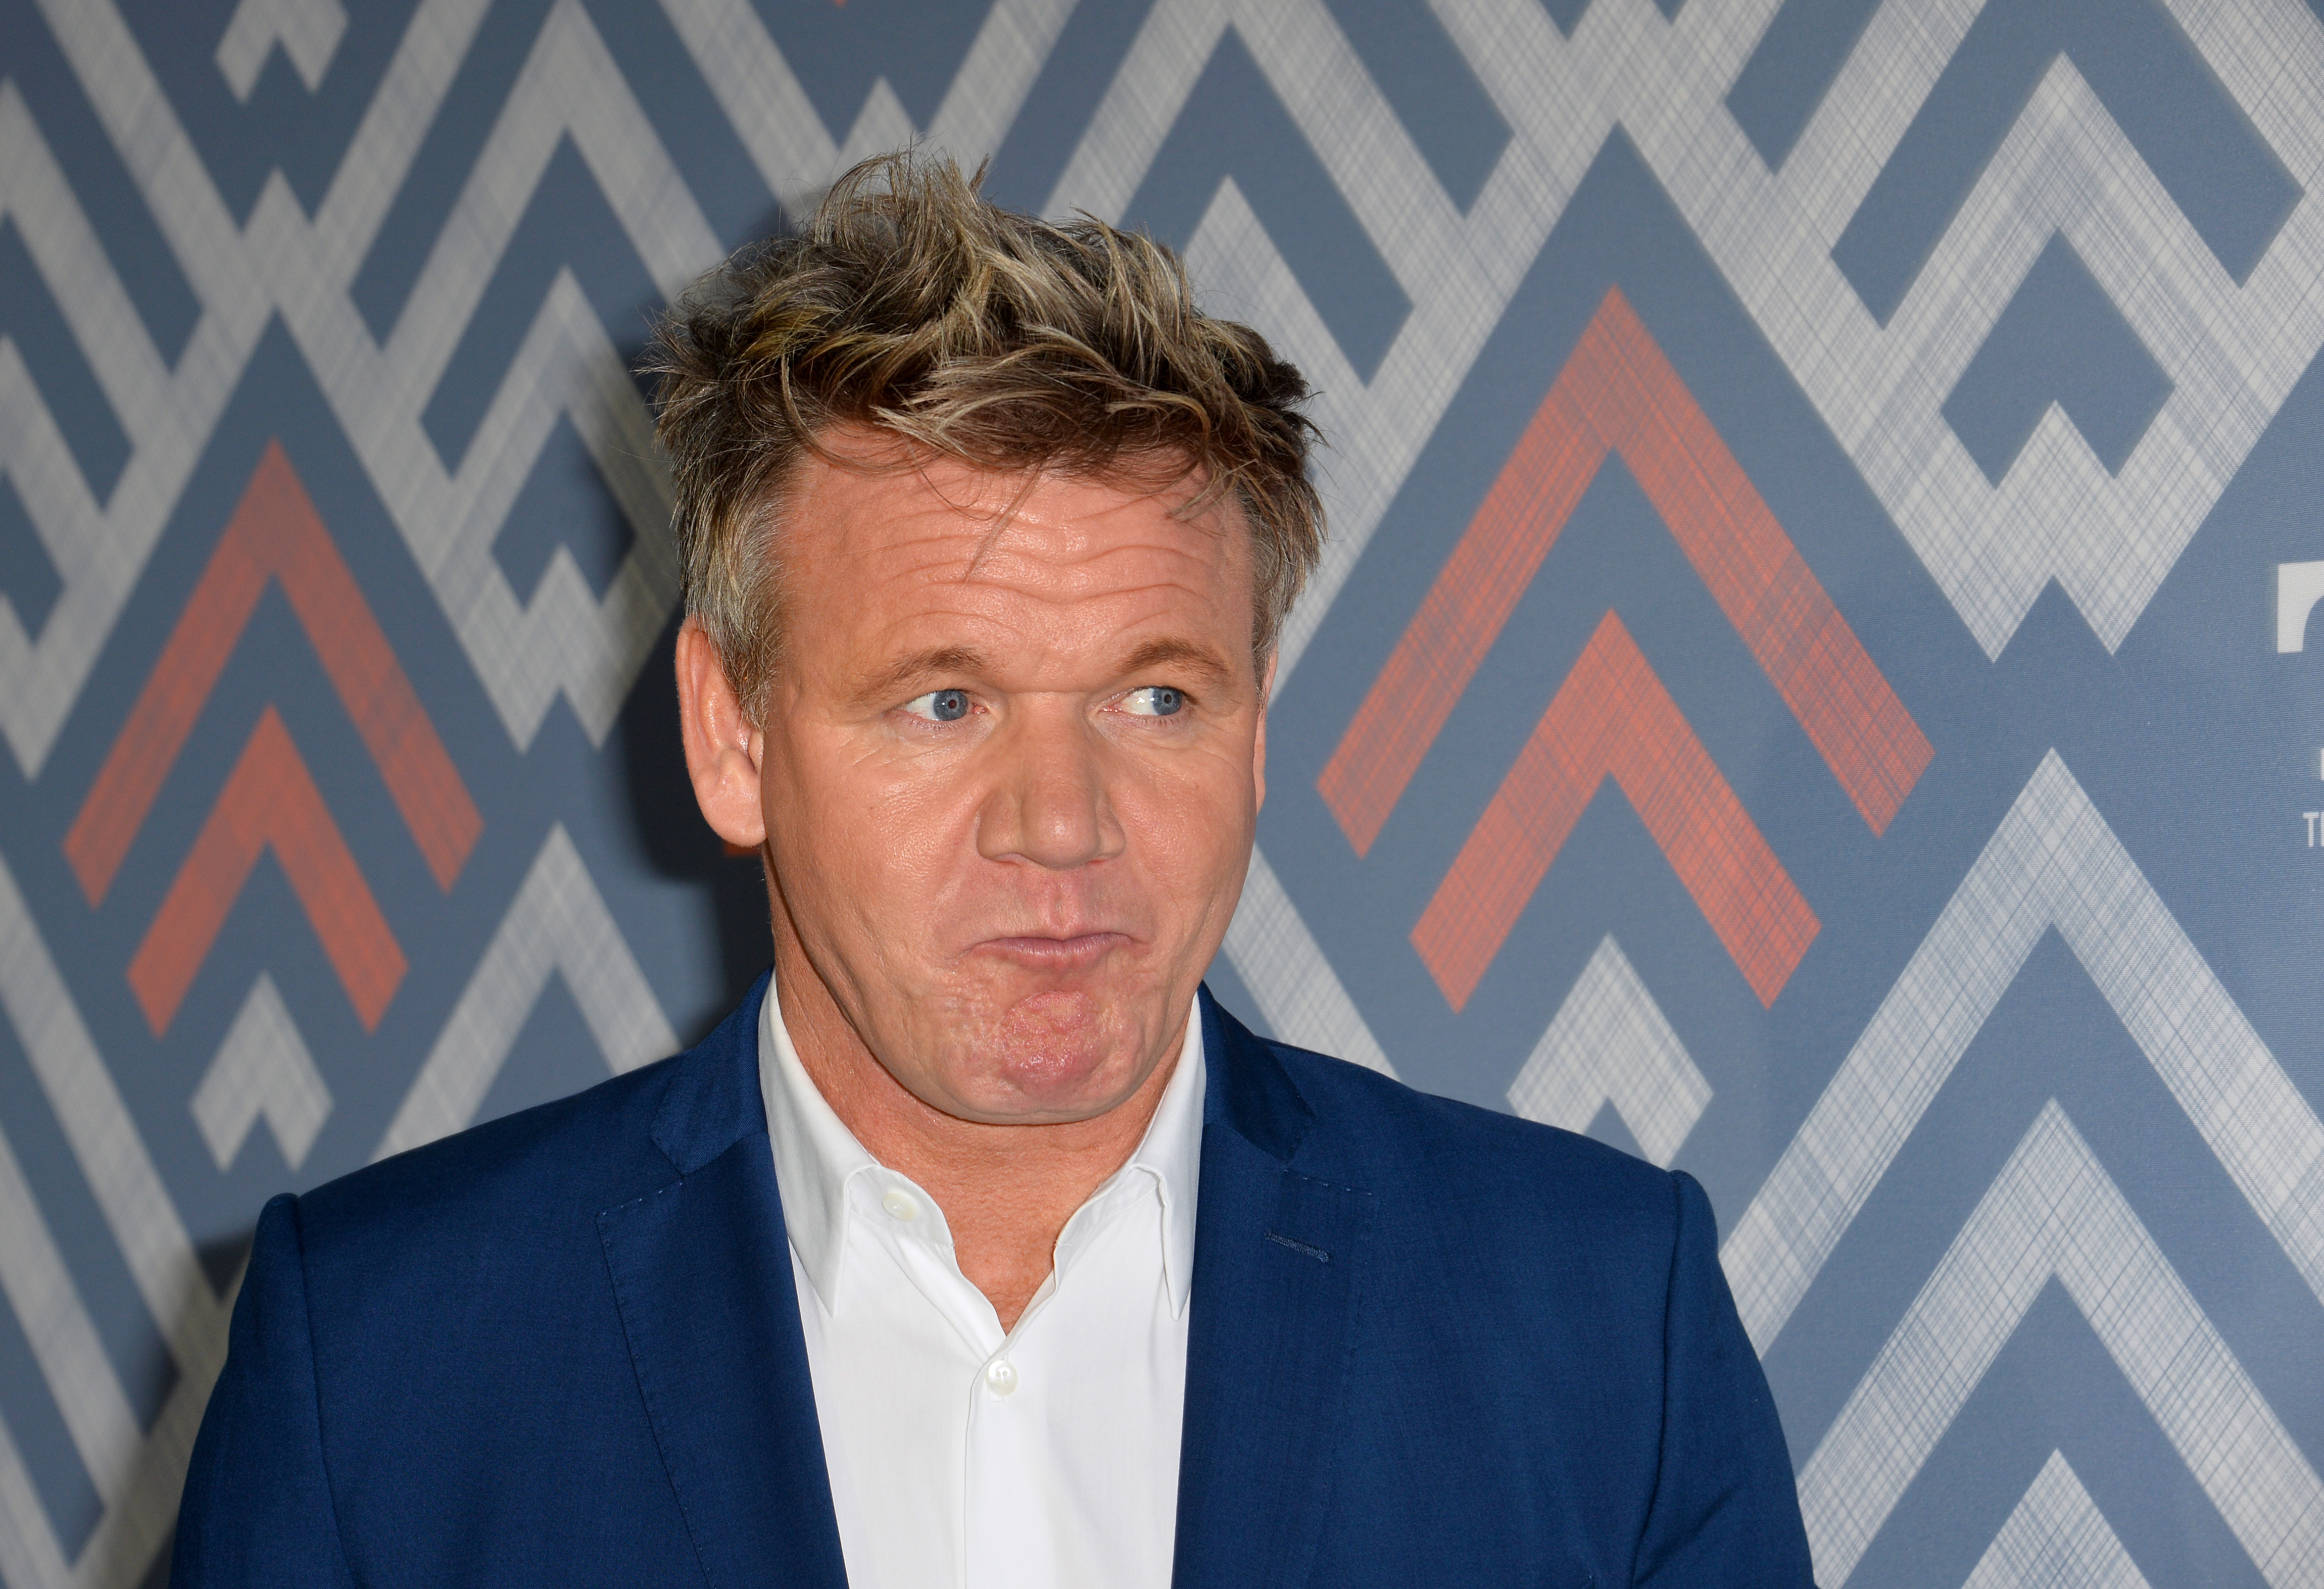 Gordon Ramsay wears a suit against a chevron-printed background, while pulling a strange face